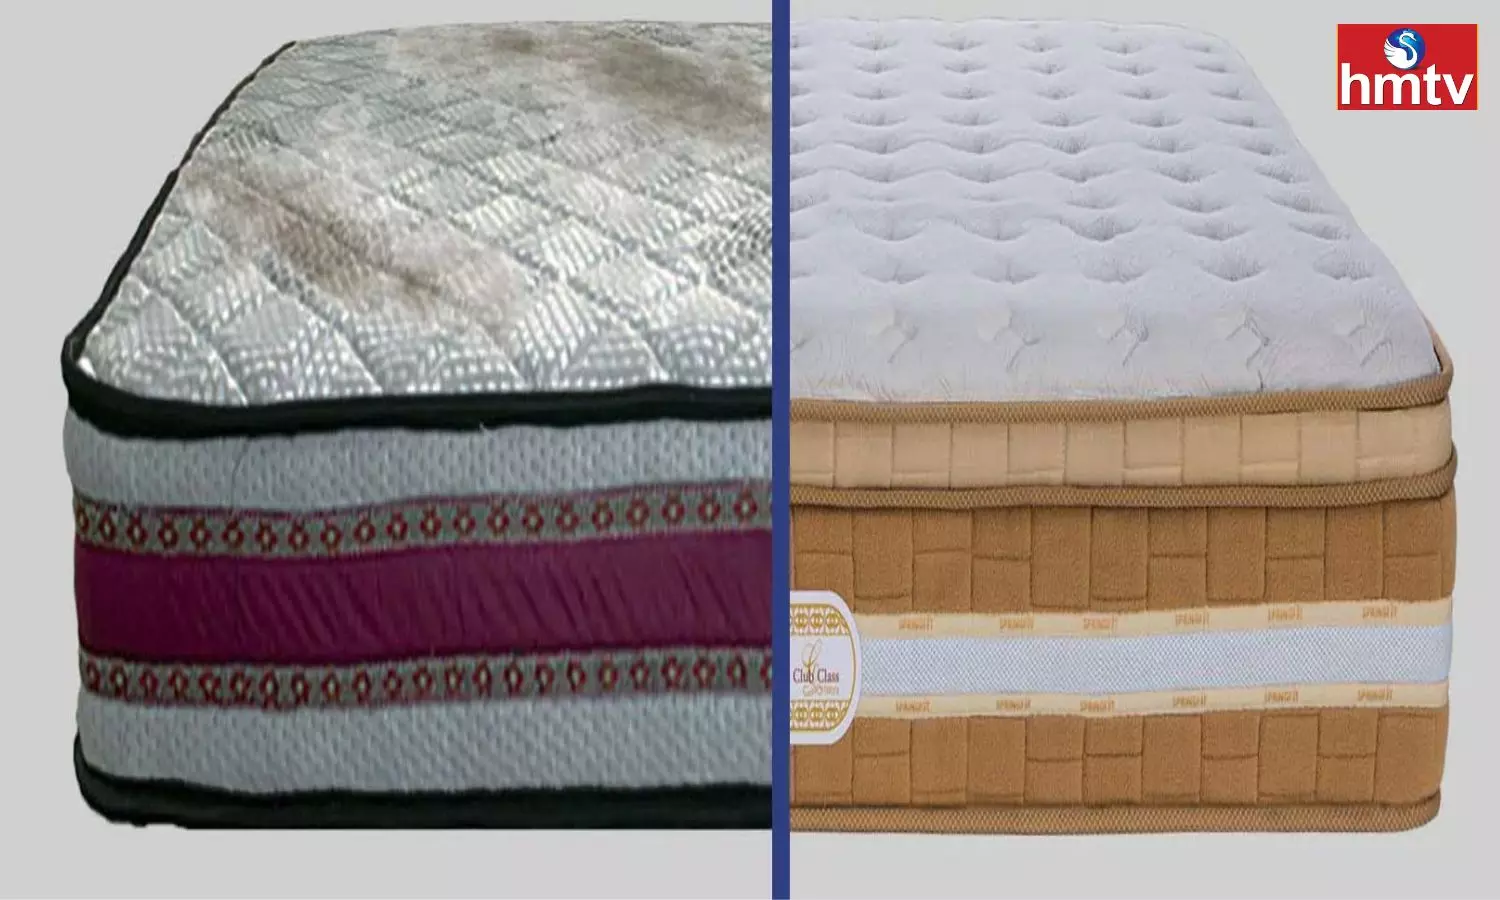 How To Know If The Bed Mattress Has Become Useless Keep These Things In Mind